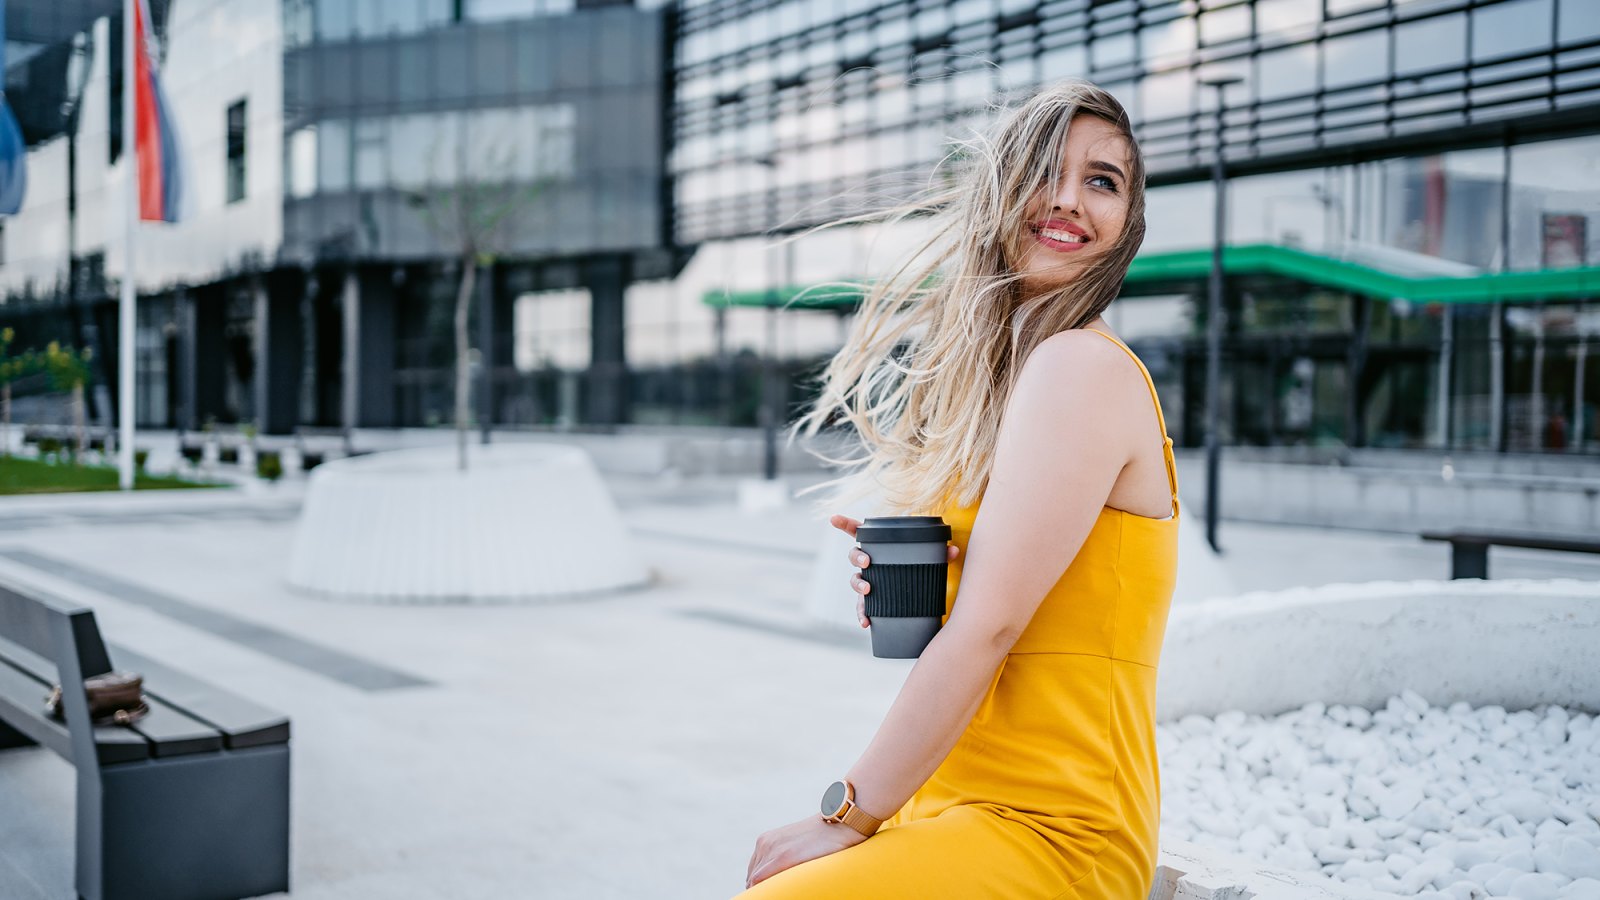 Beautiful young woman drinking coffee in a downtown district.